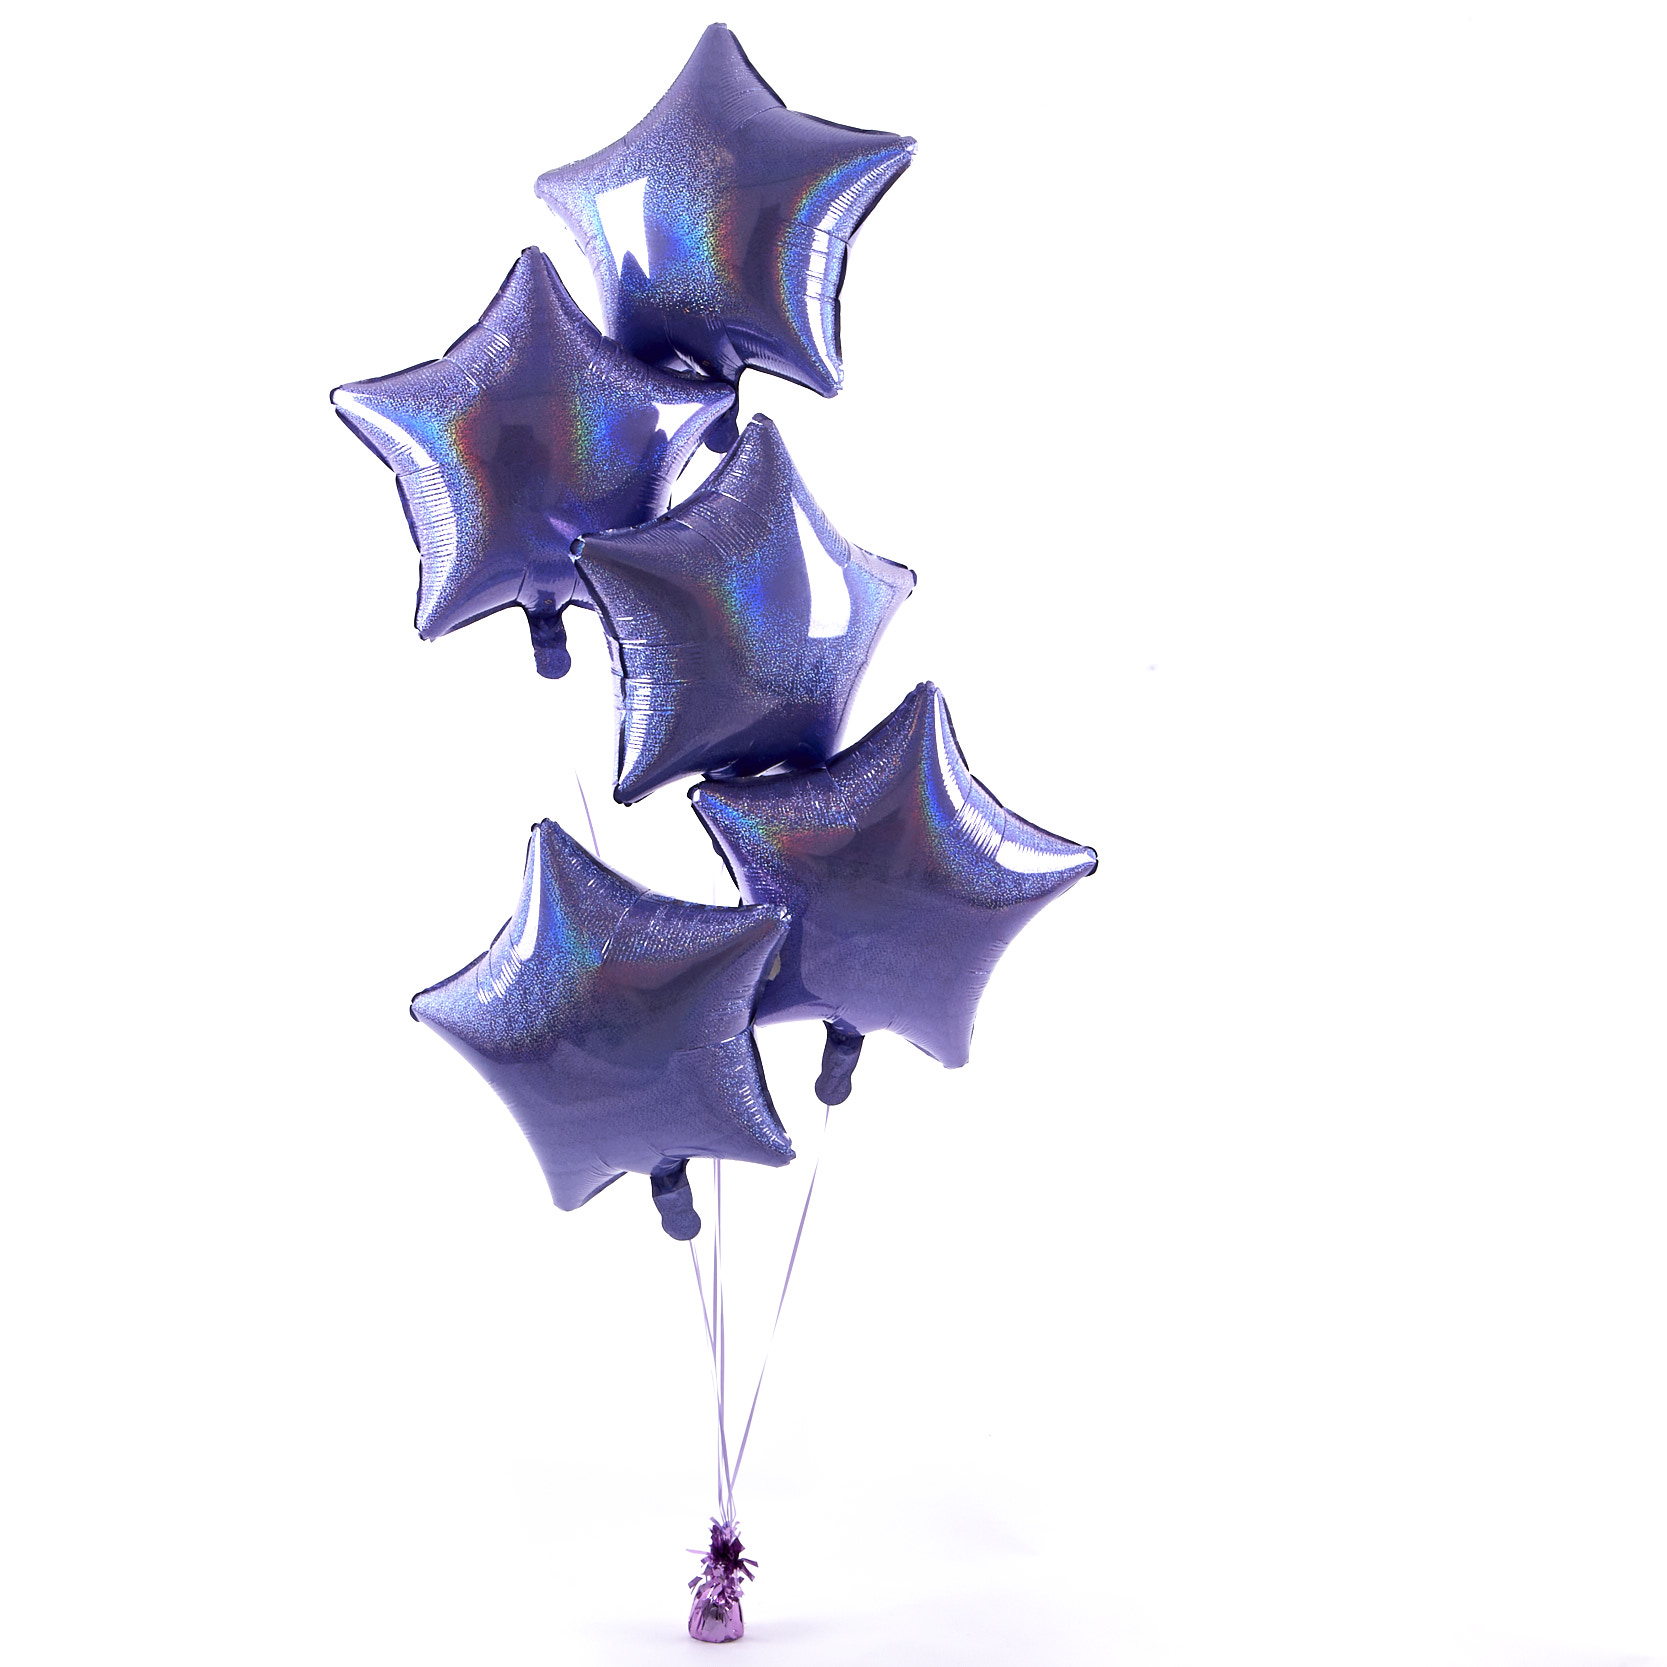 5 Lilac Stars Balloon Bouquet - DELIVERED INFLATED!